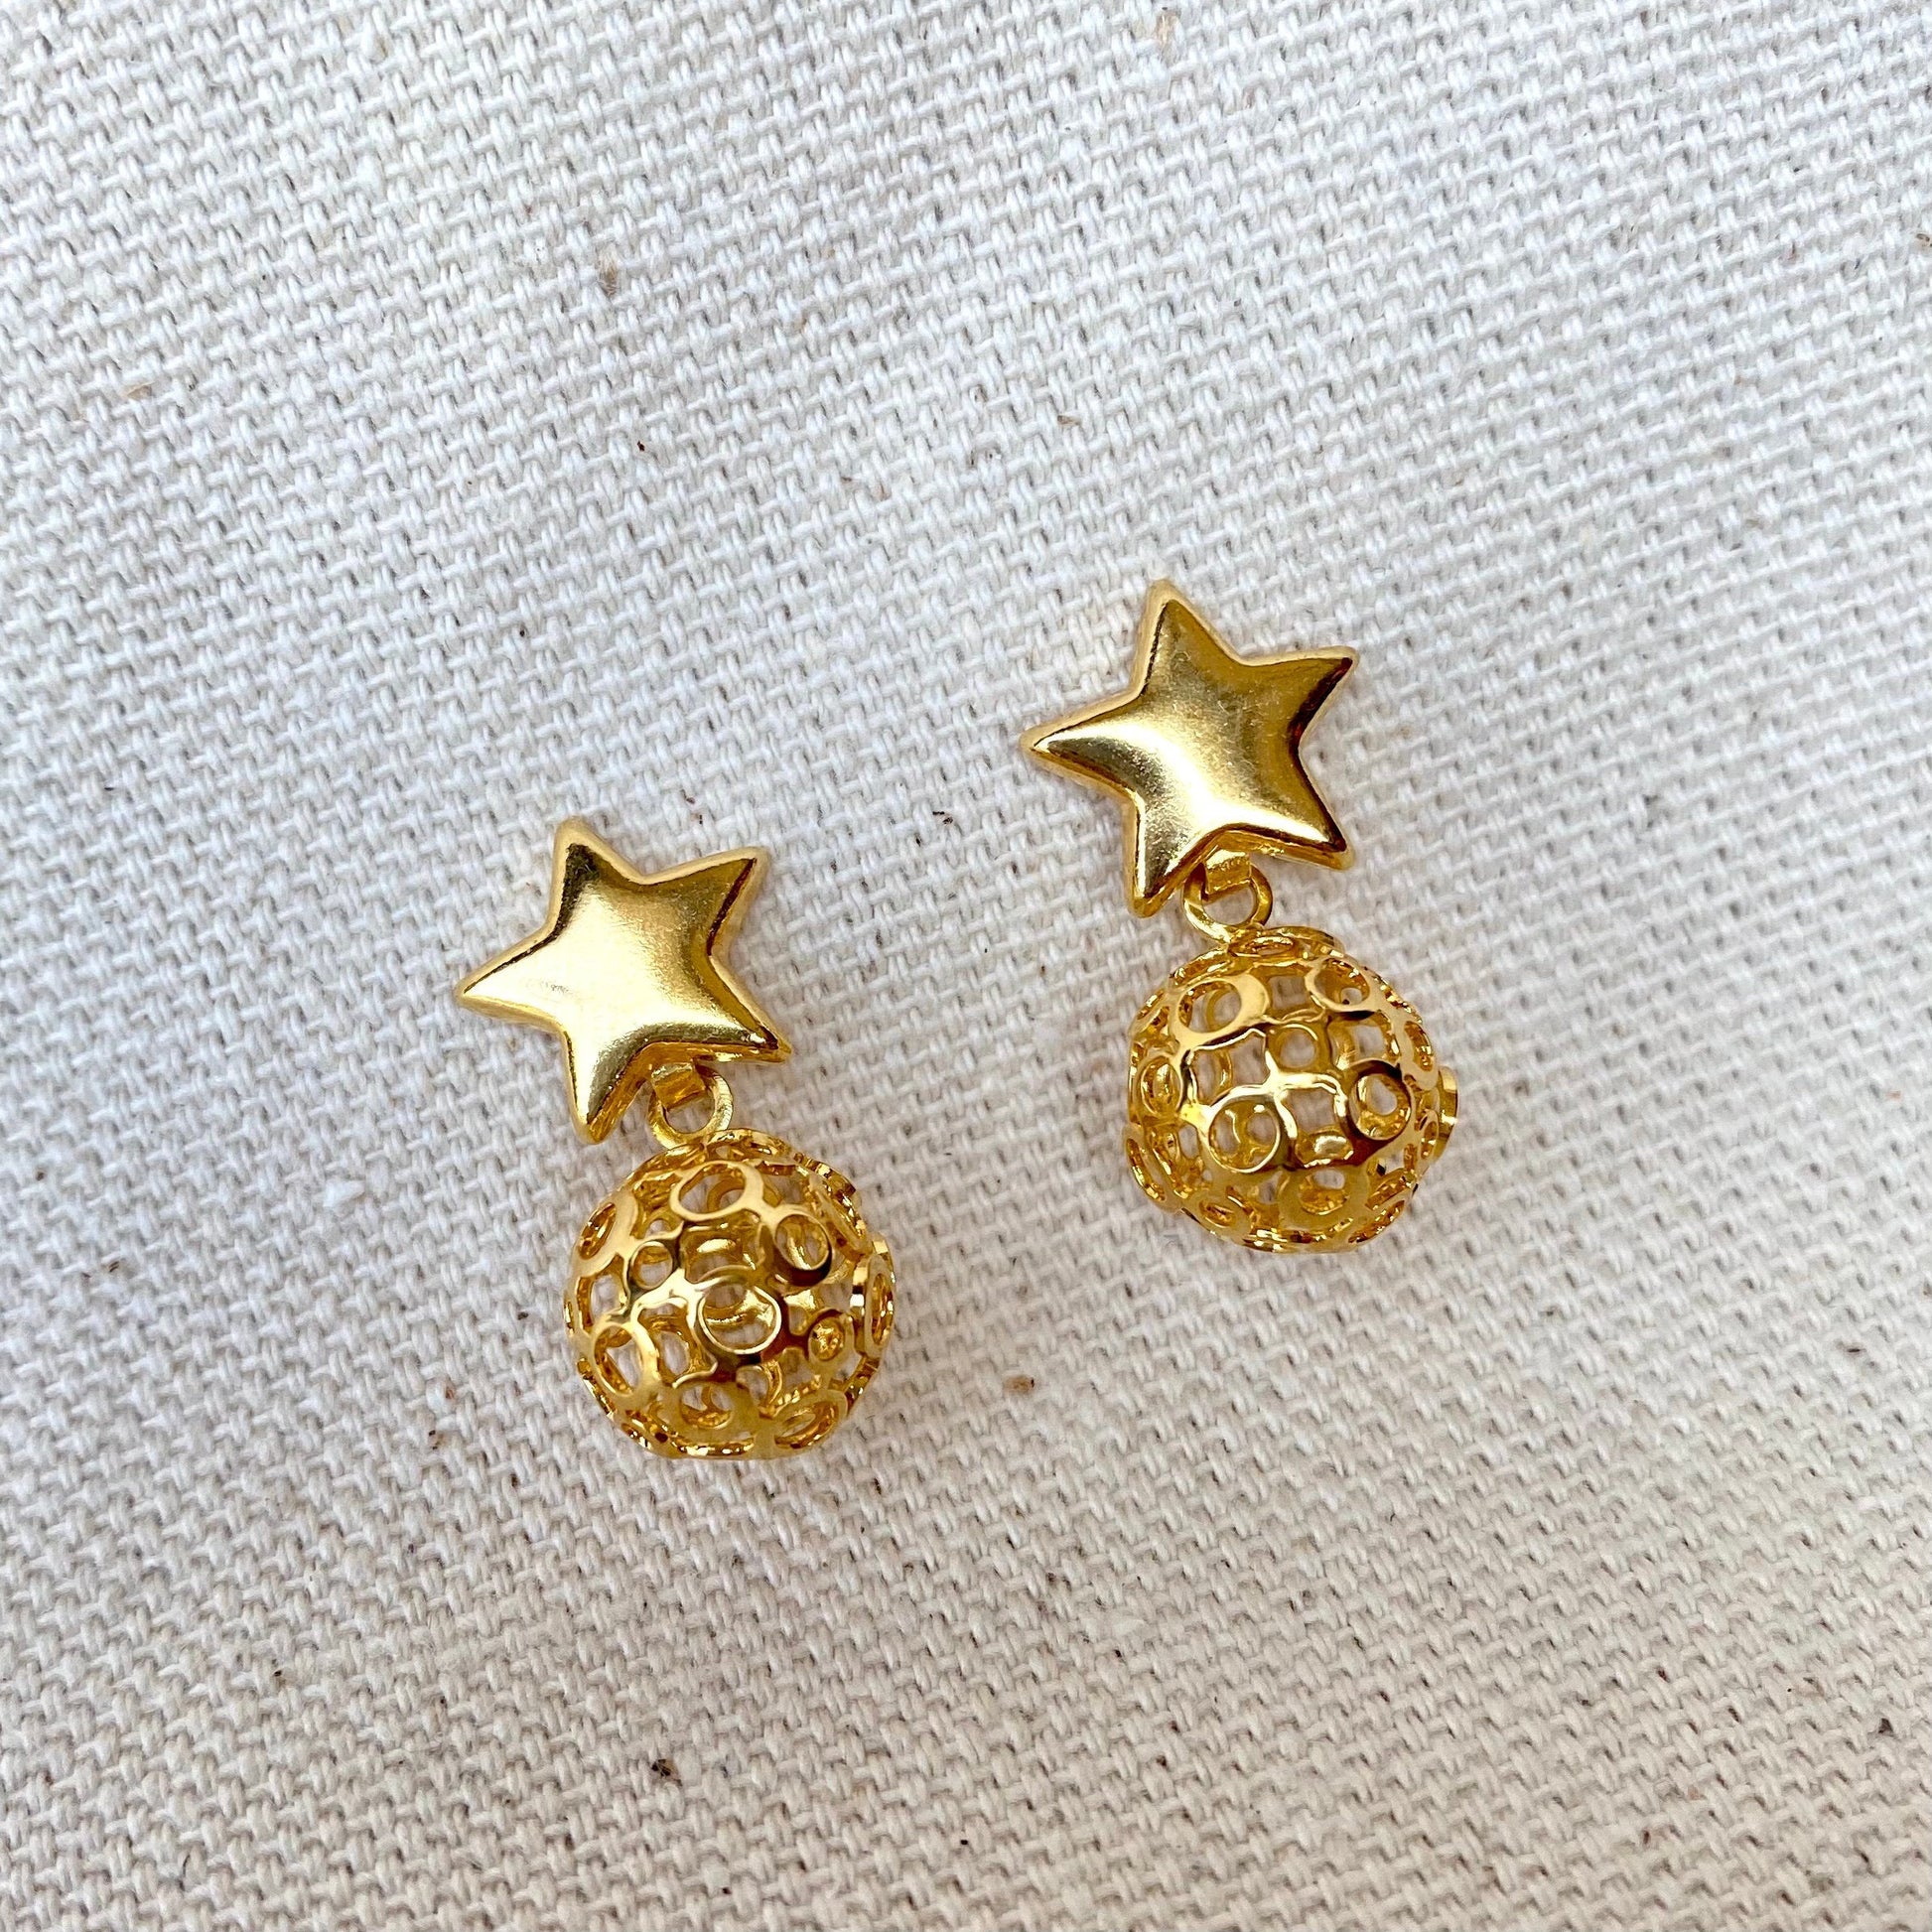 18k Gold Filled Star Hallowed Ball Earrings Wholesale Jewelry Supplies